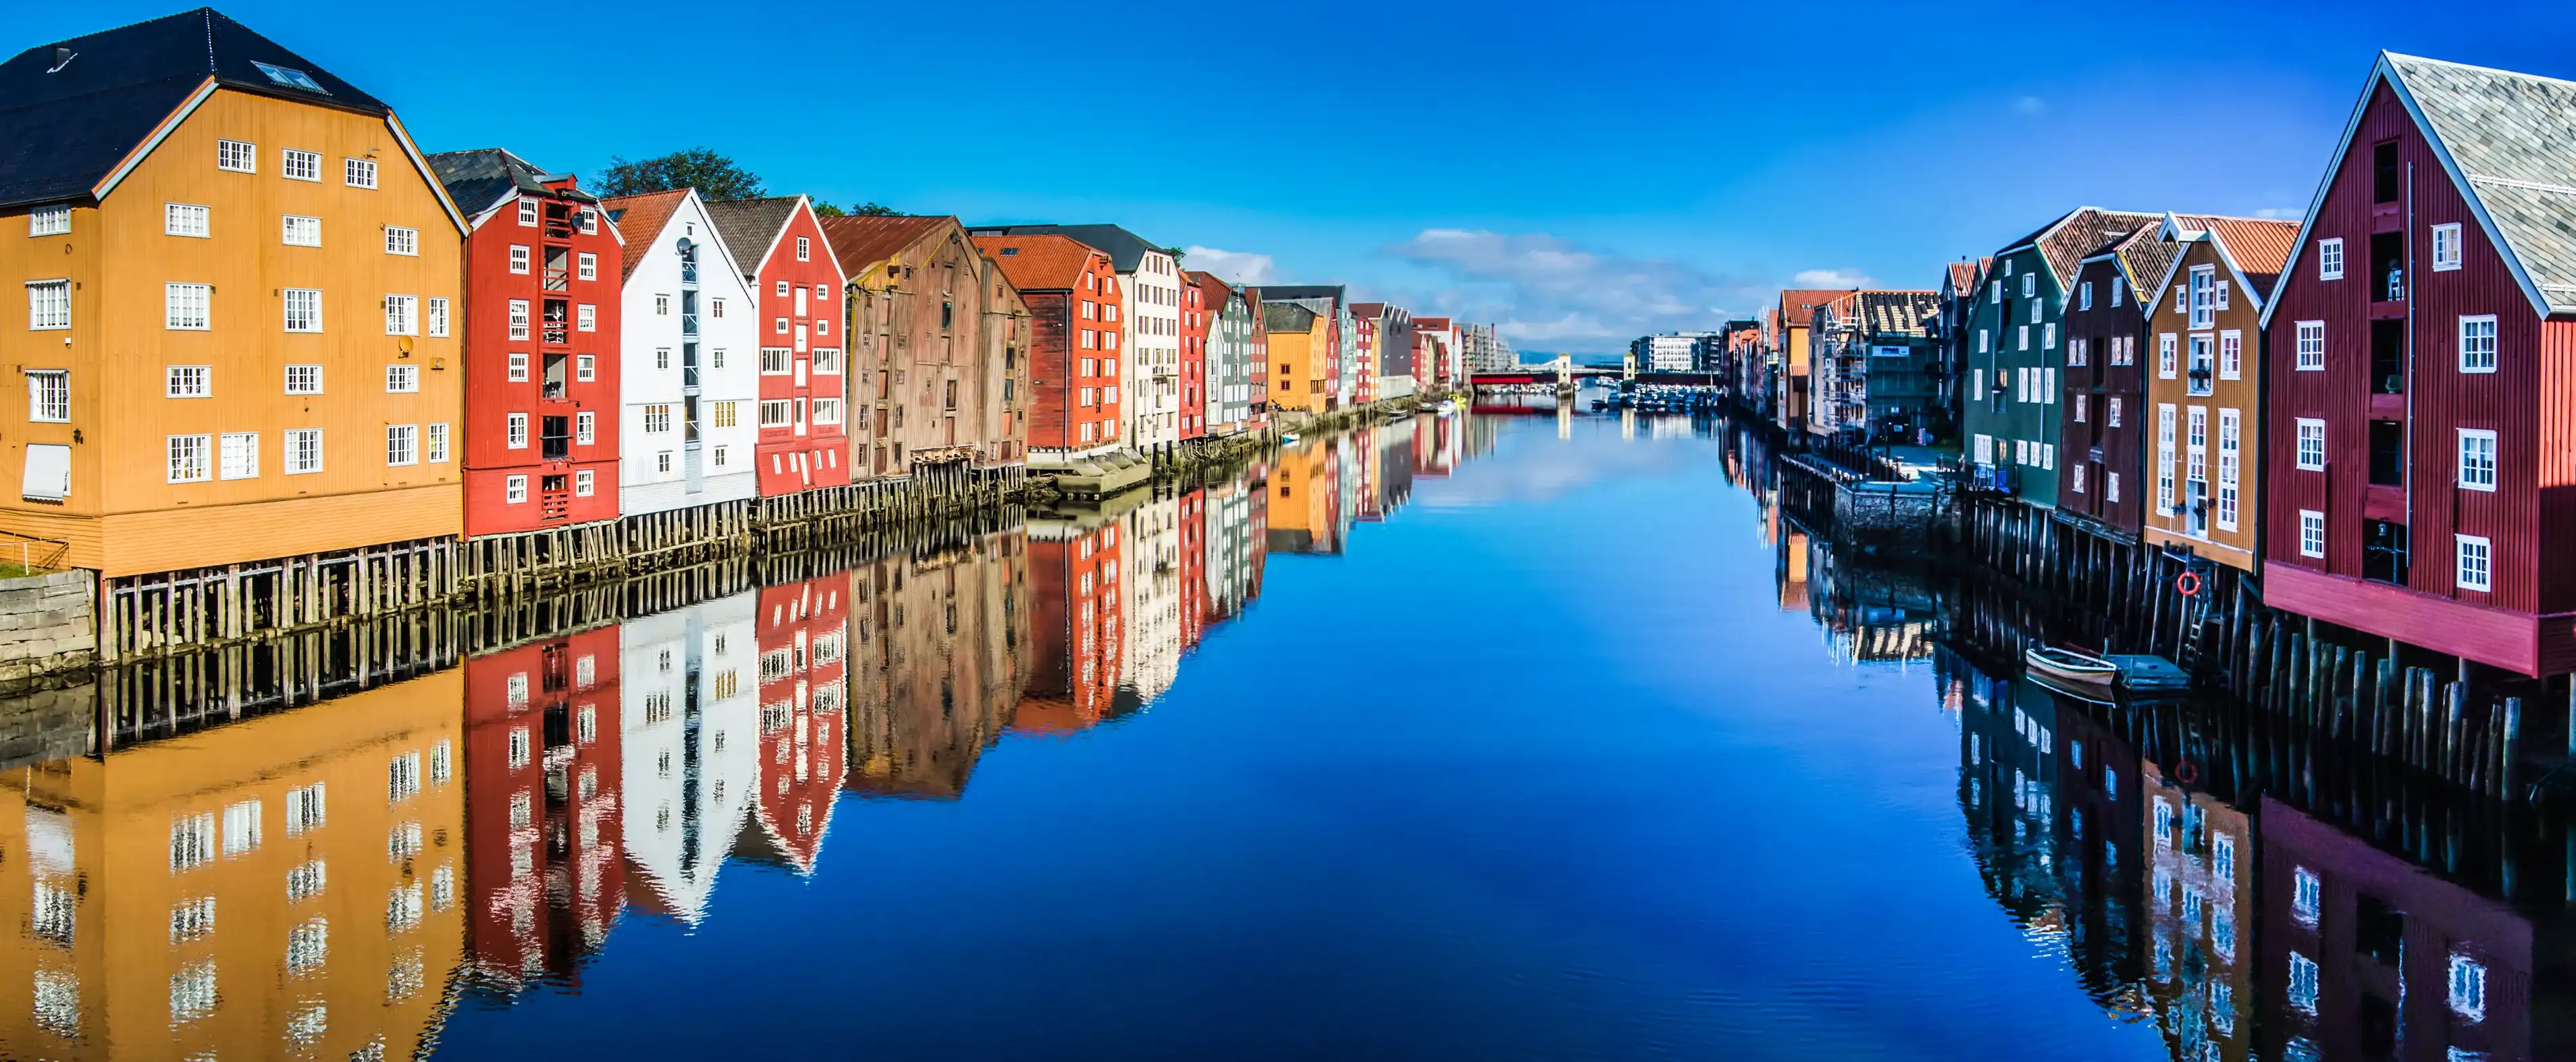 Panoramic view from bridge to famous wooden colored houses in Trondheim city, Norway - architecture background